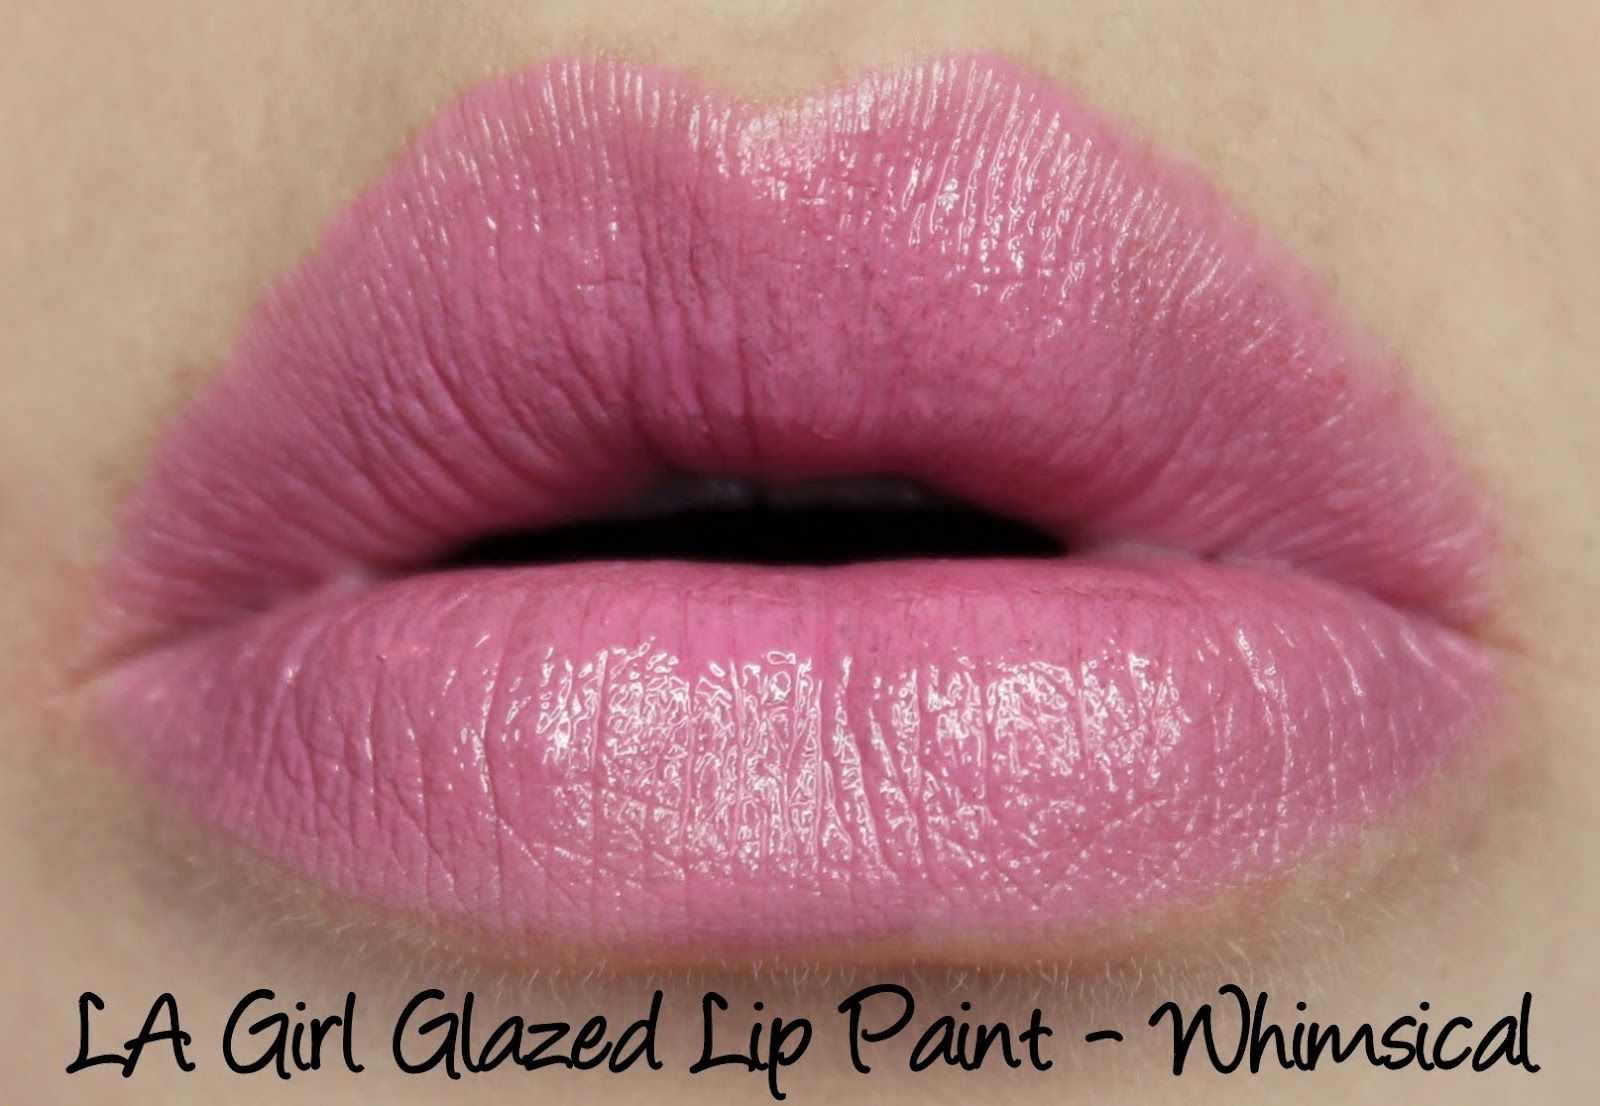 LA Girl Glazed Lip Paint - Whimsical Swatches & Review